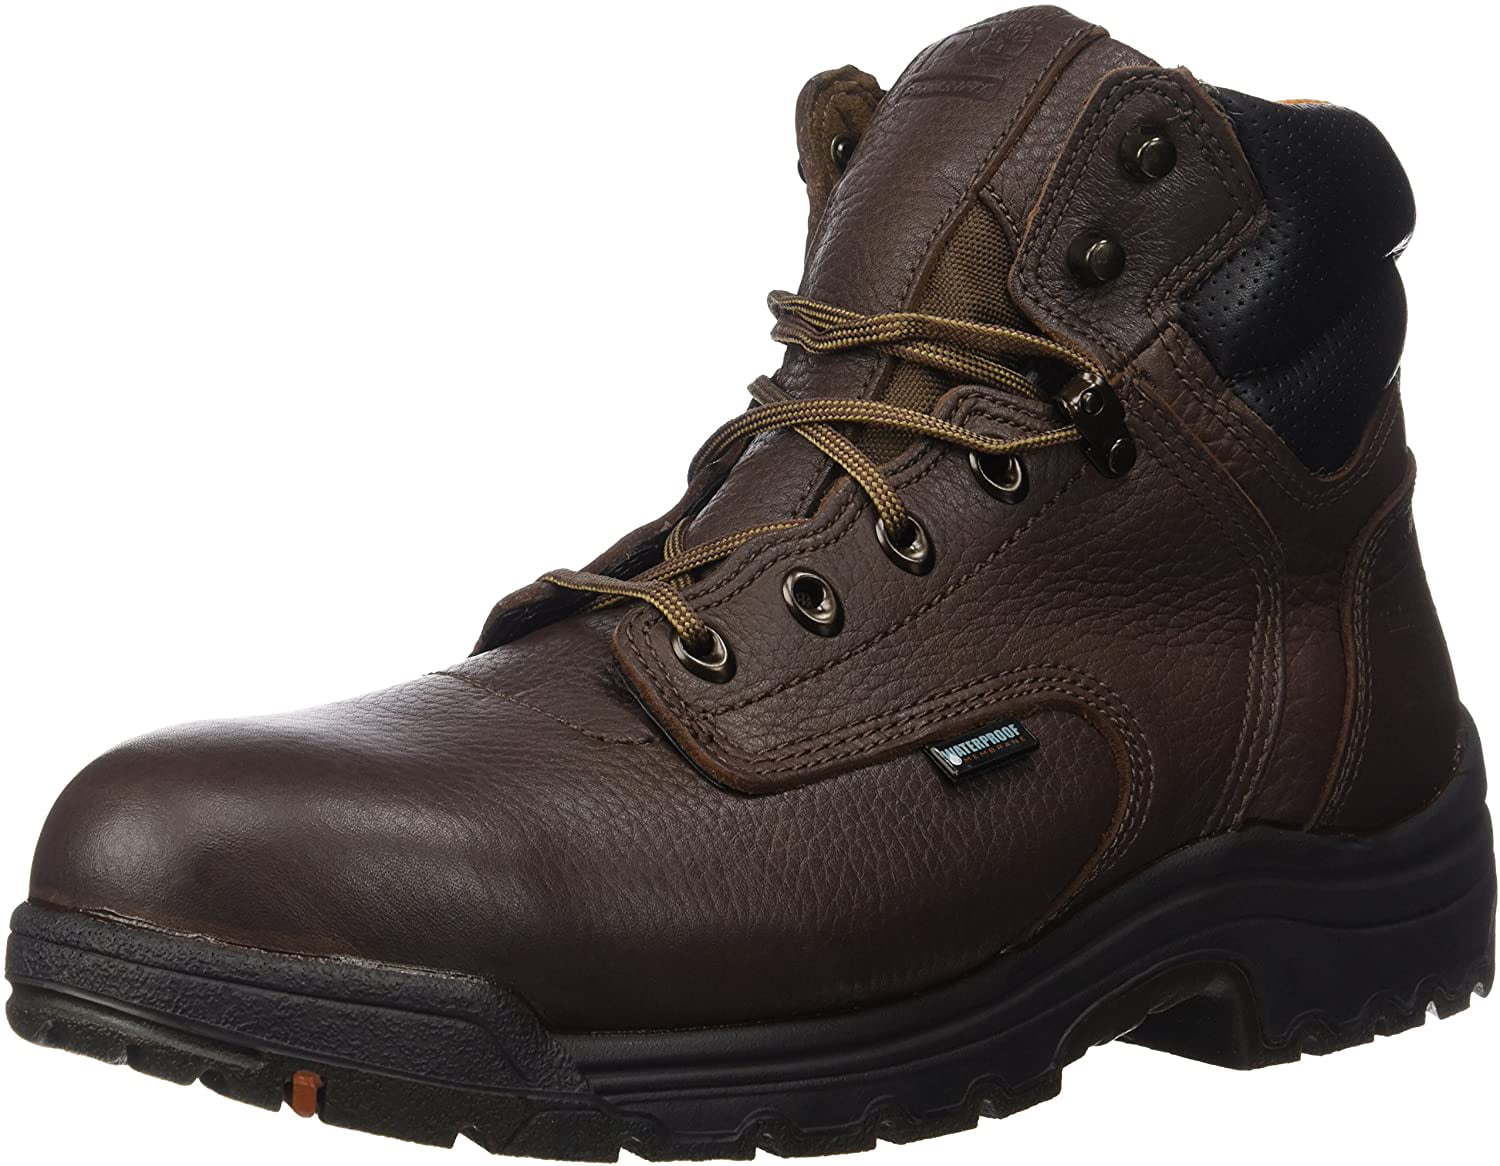 men steel toe safety leather boots lightweight dual density sole sizes 6-14